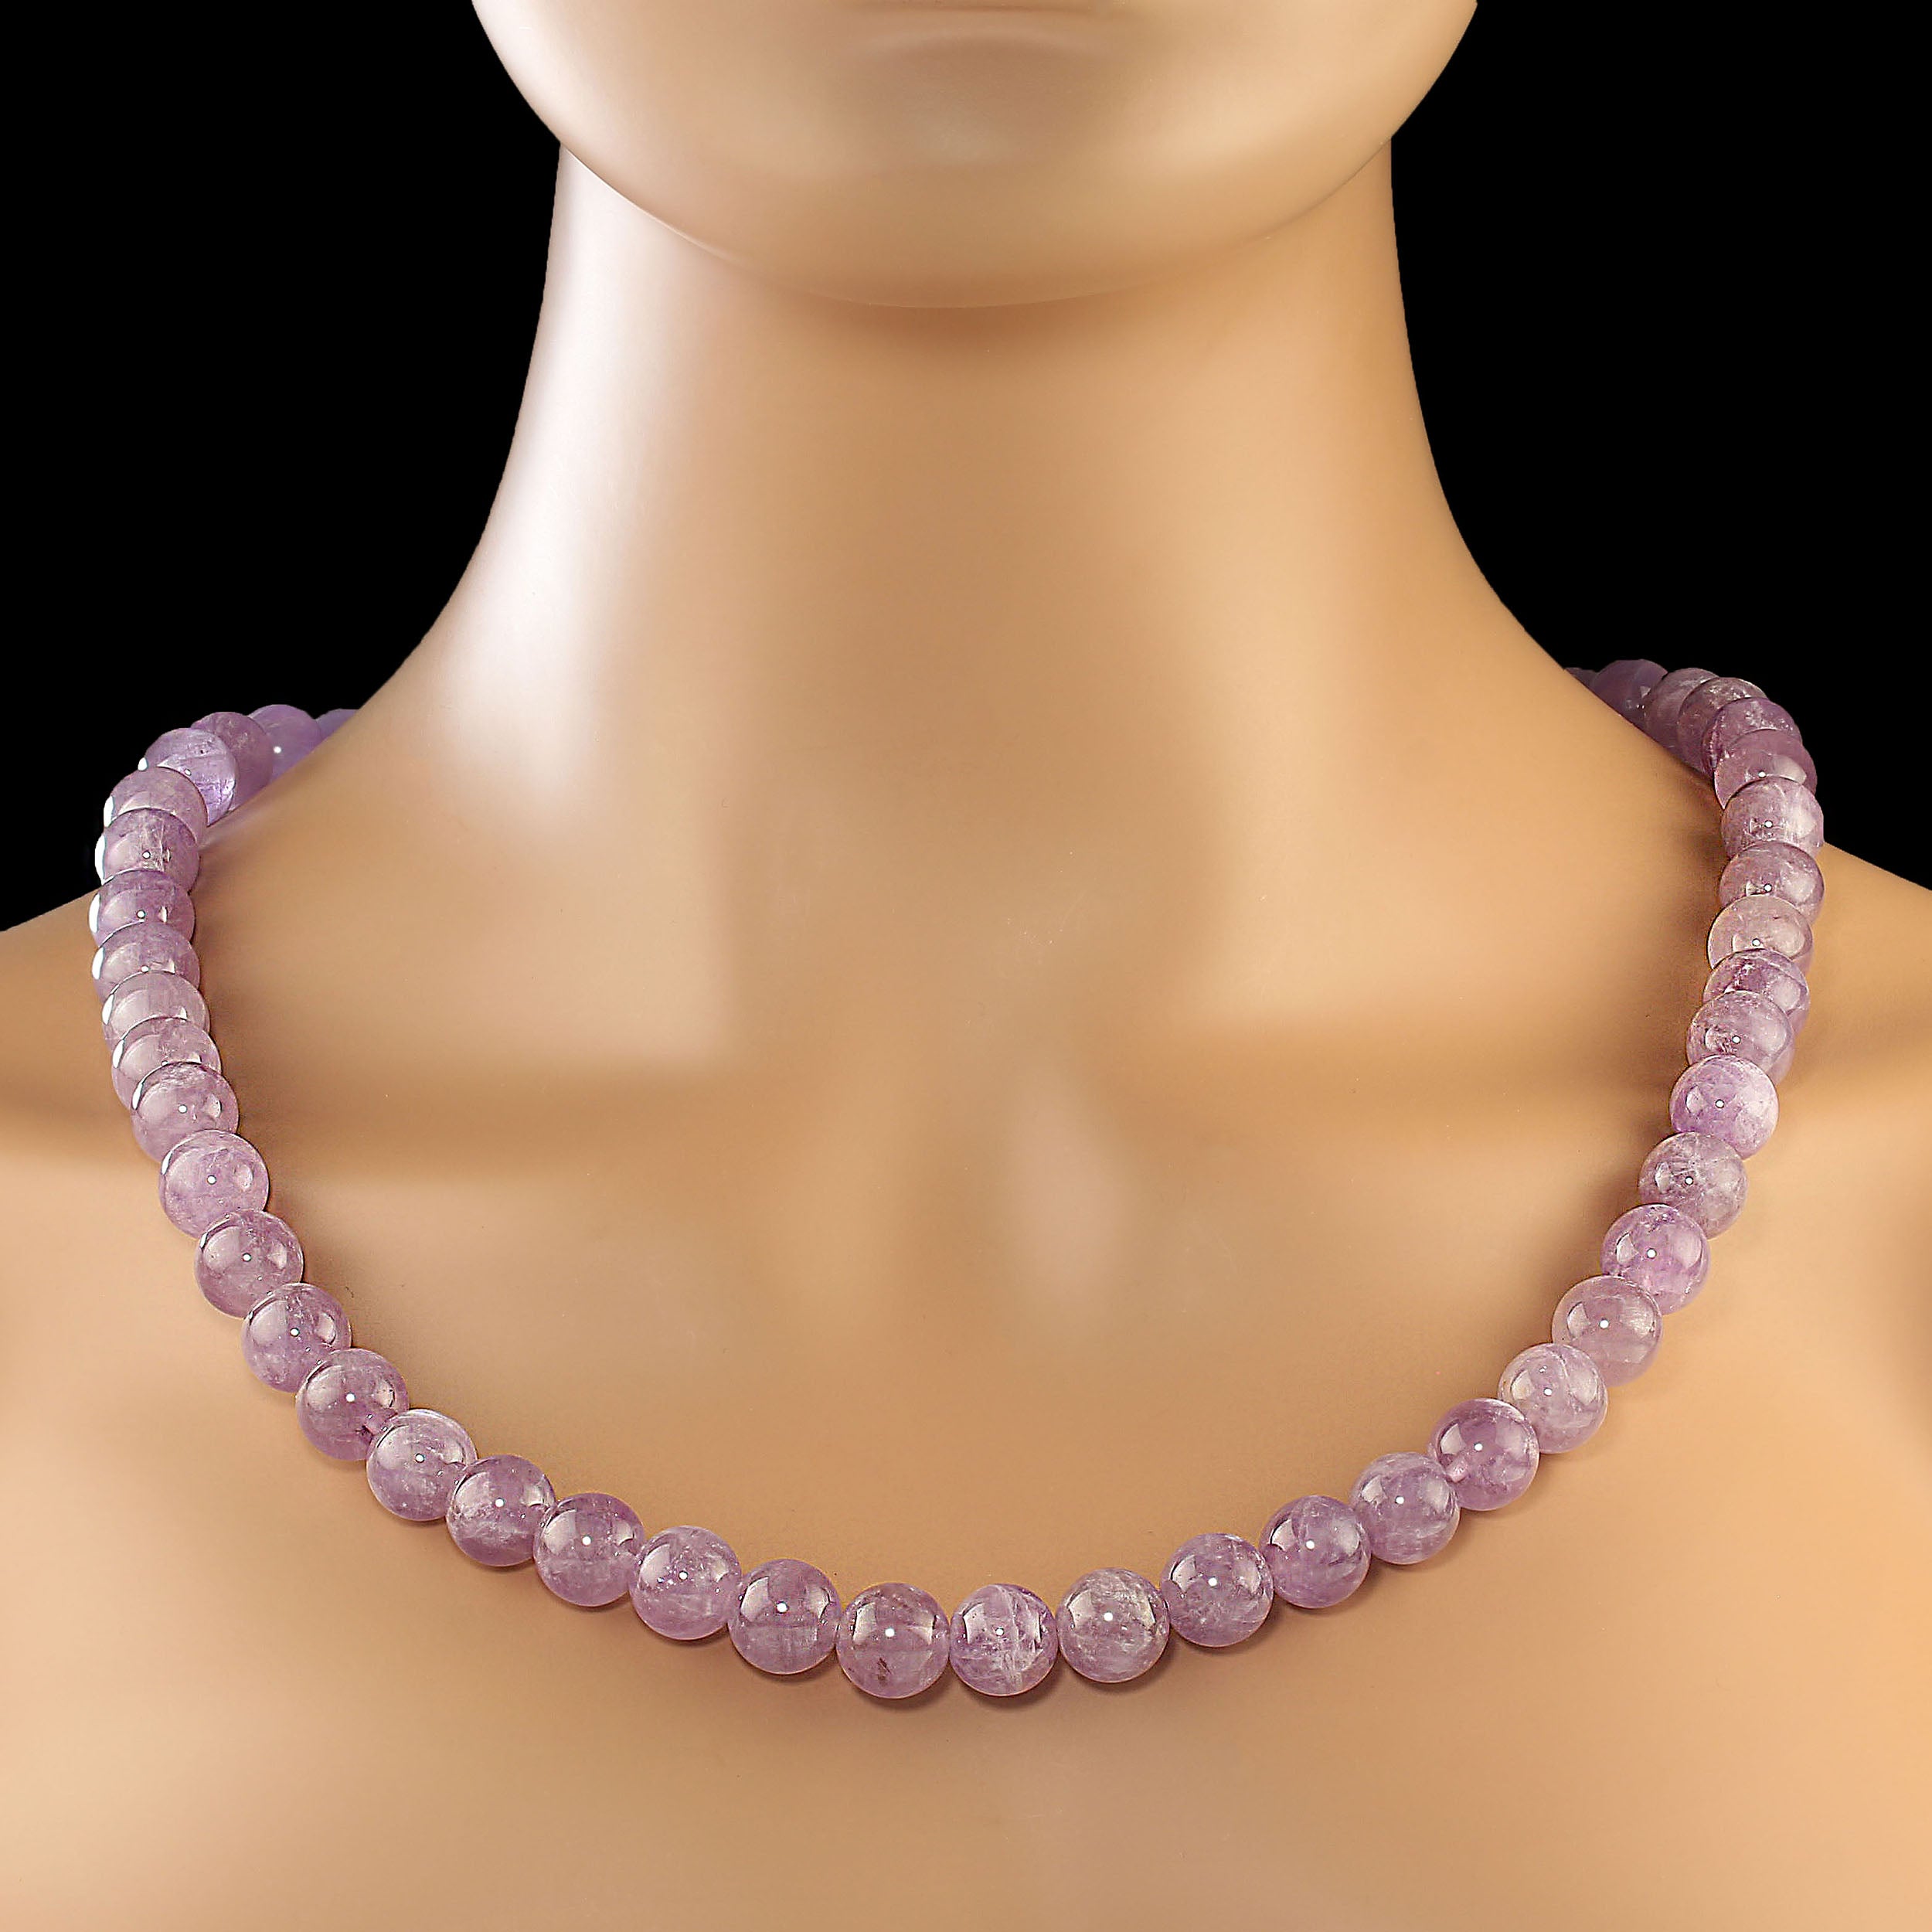 AJD 25 Inch Glowing Lilac Amethyst Necklace  February Birthstone! For Sale